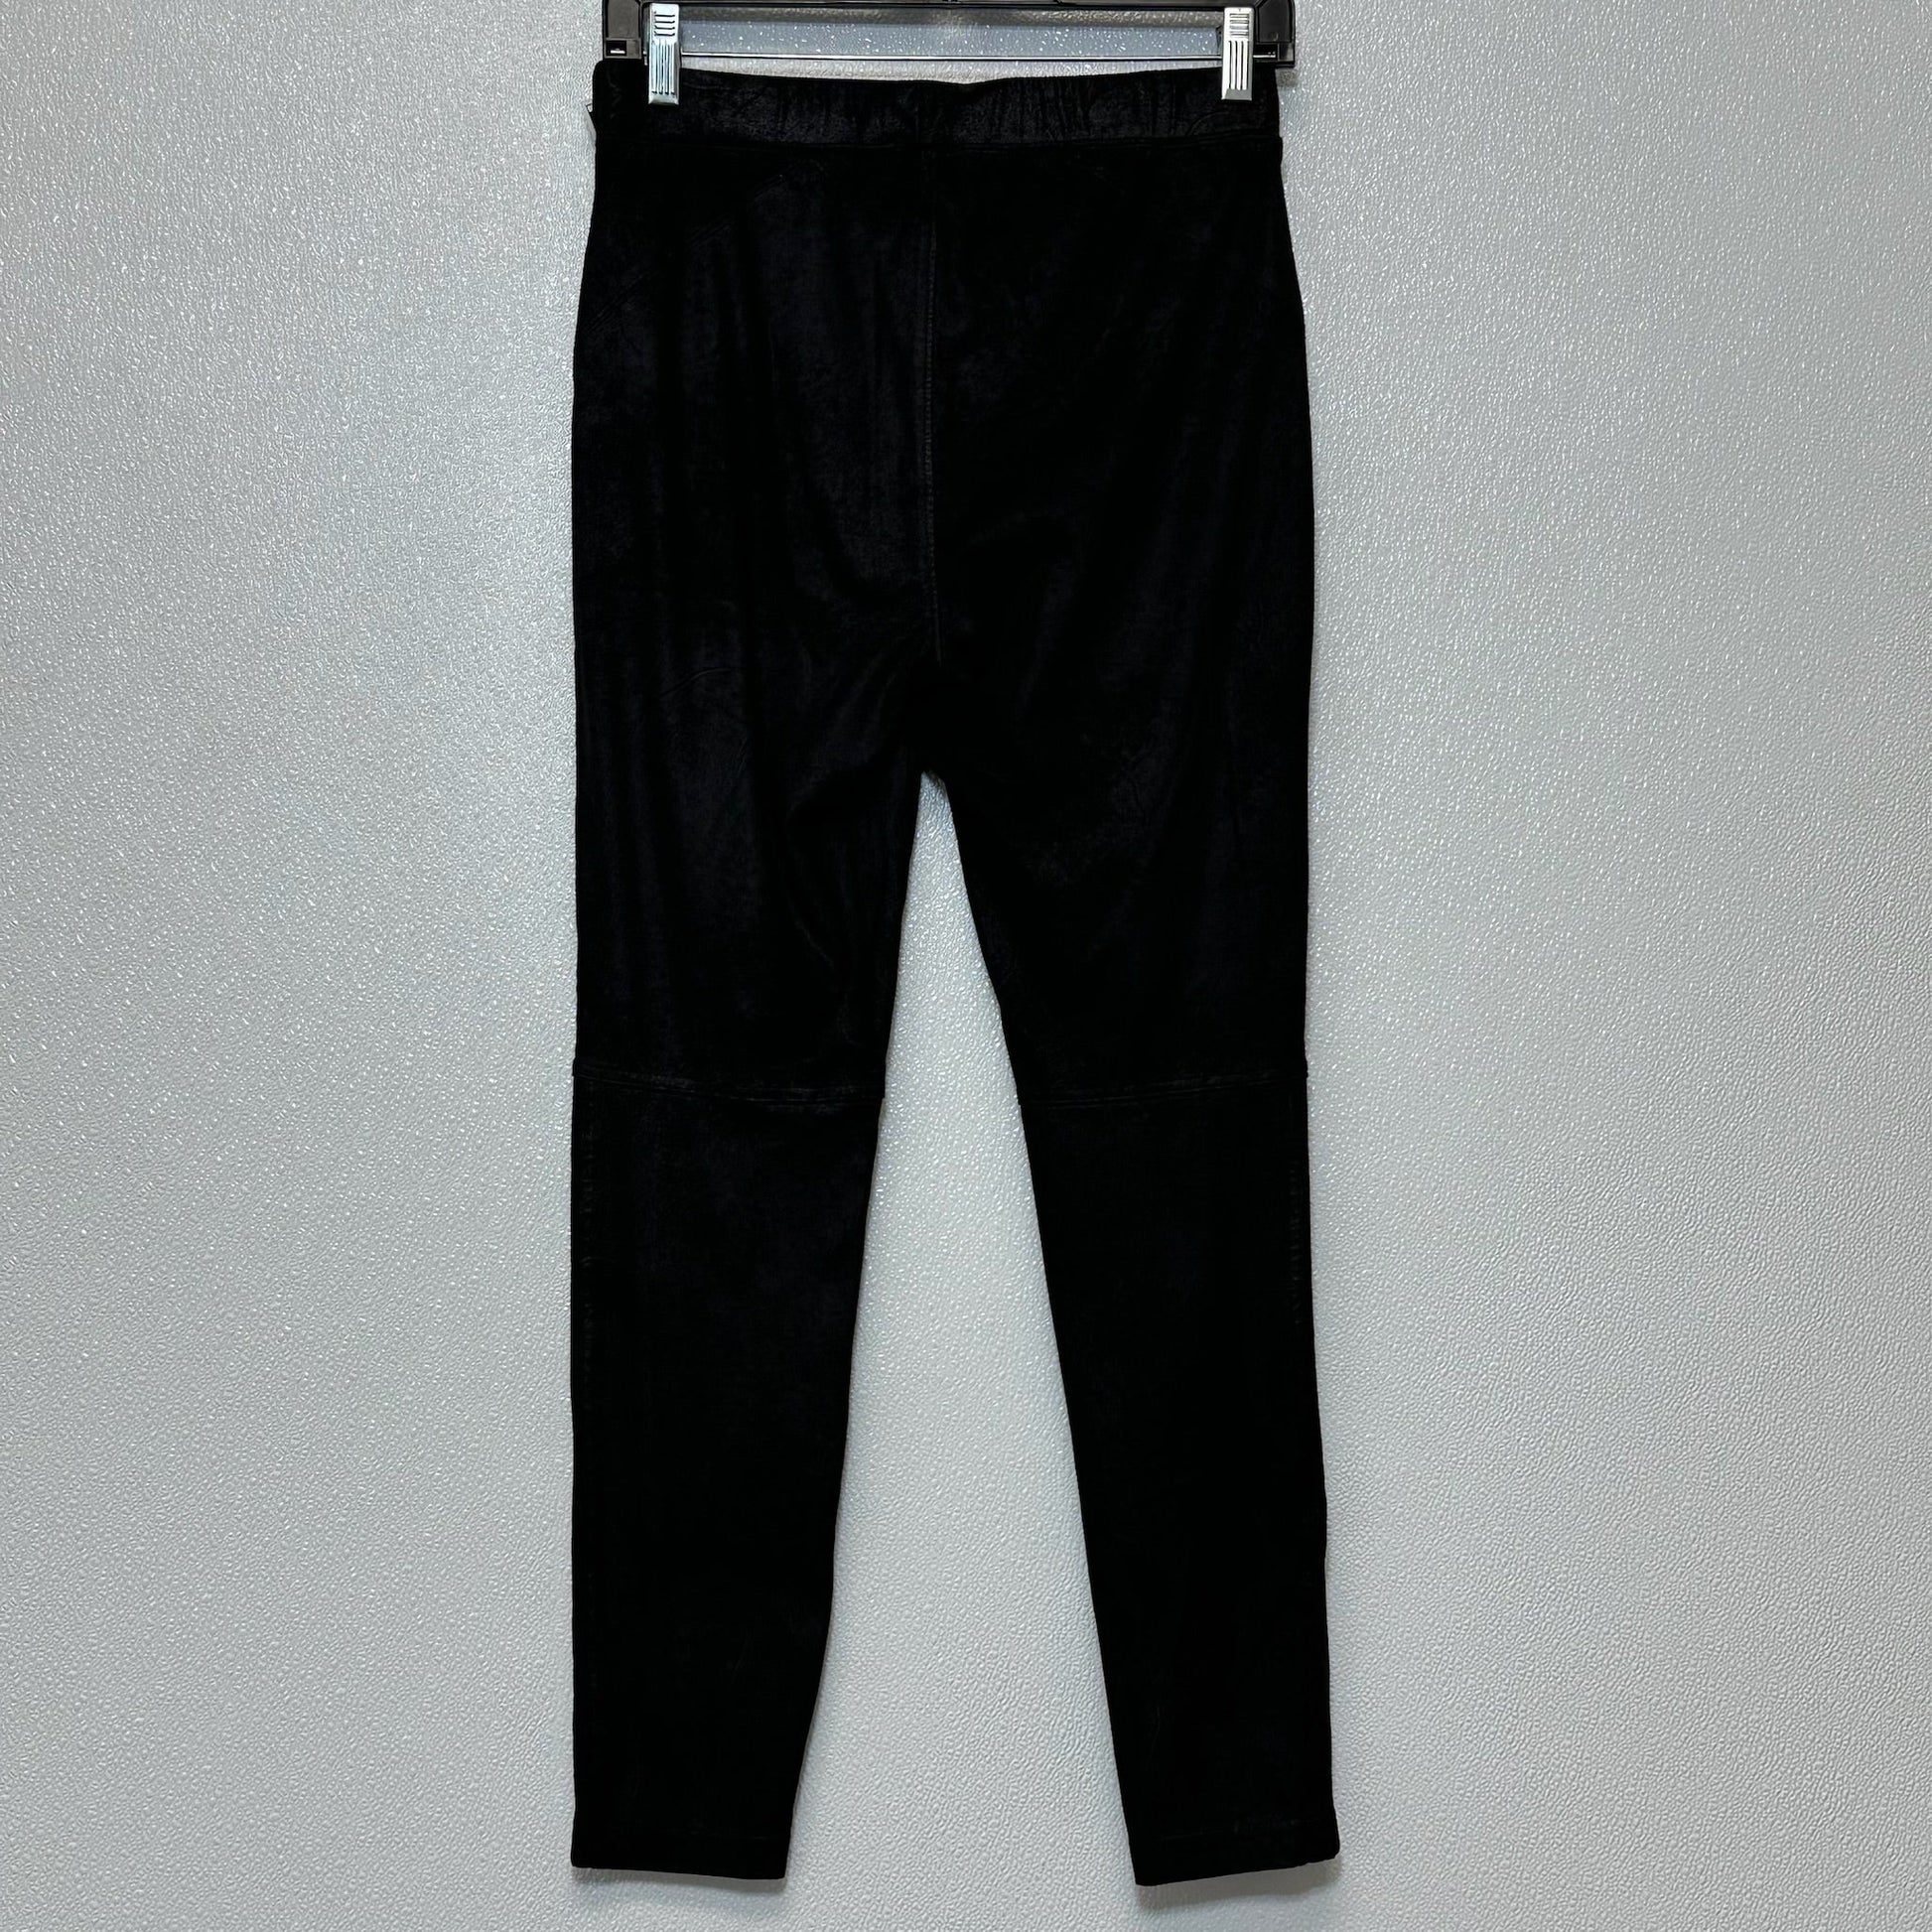 Pants Ankle By A New Day Size: 4